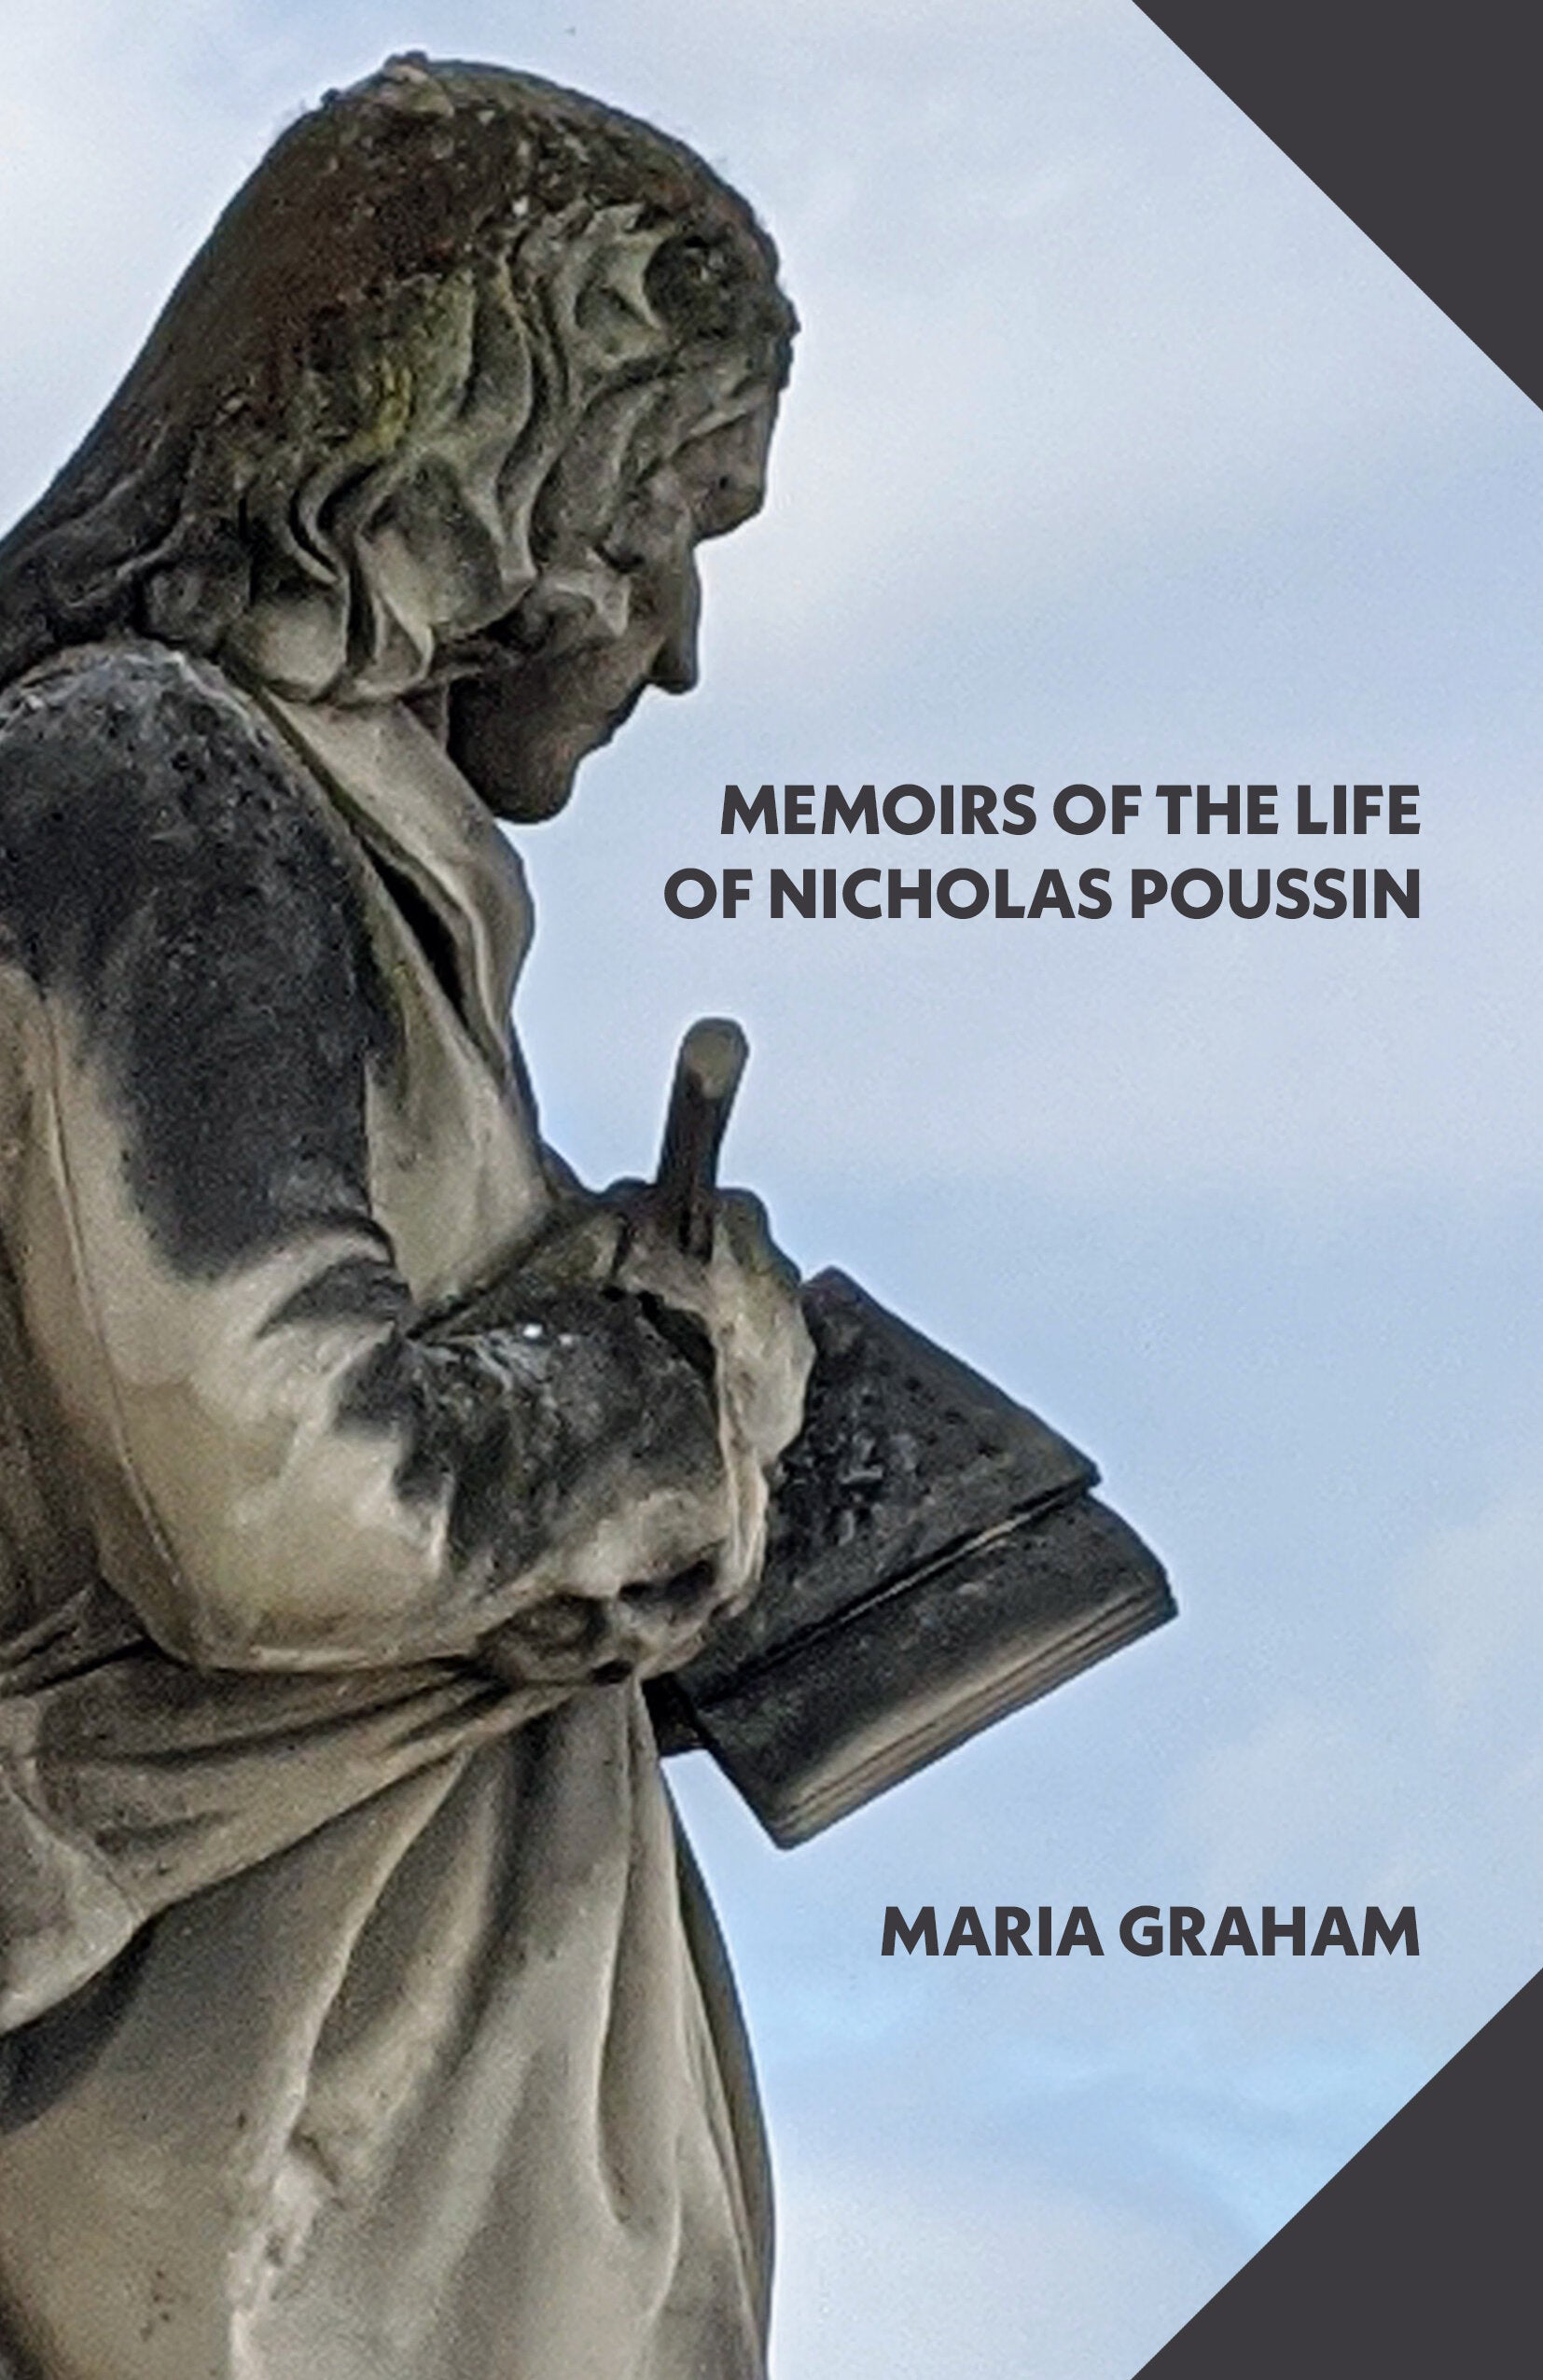 Memoirs of the Life of Nicholas Poussin